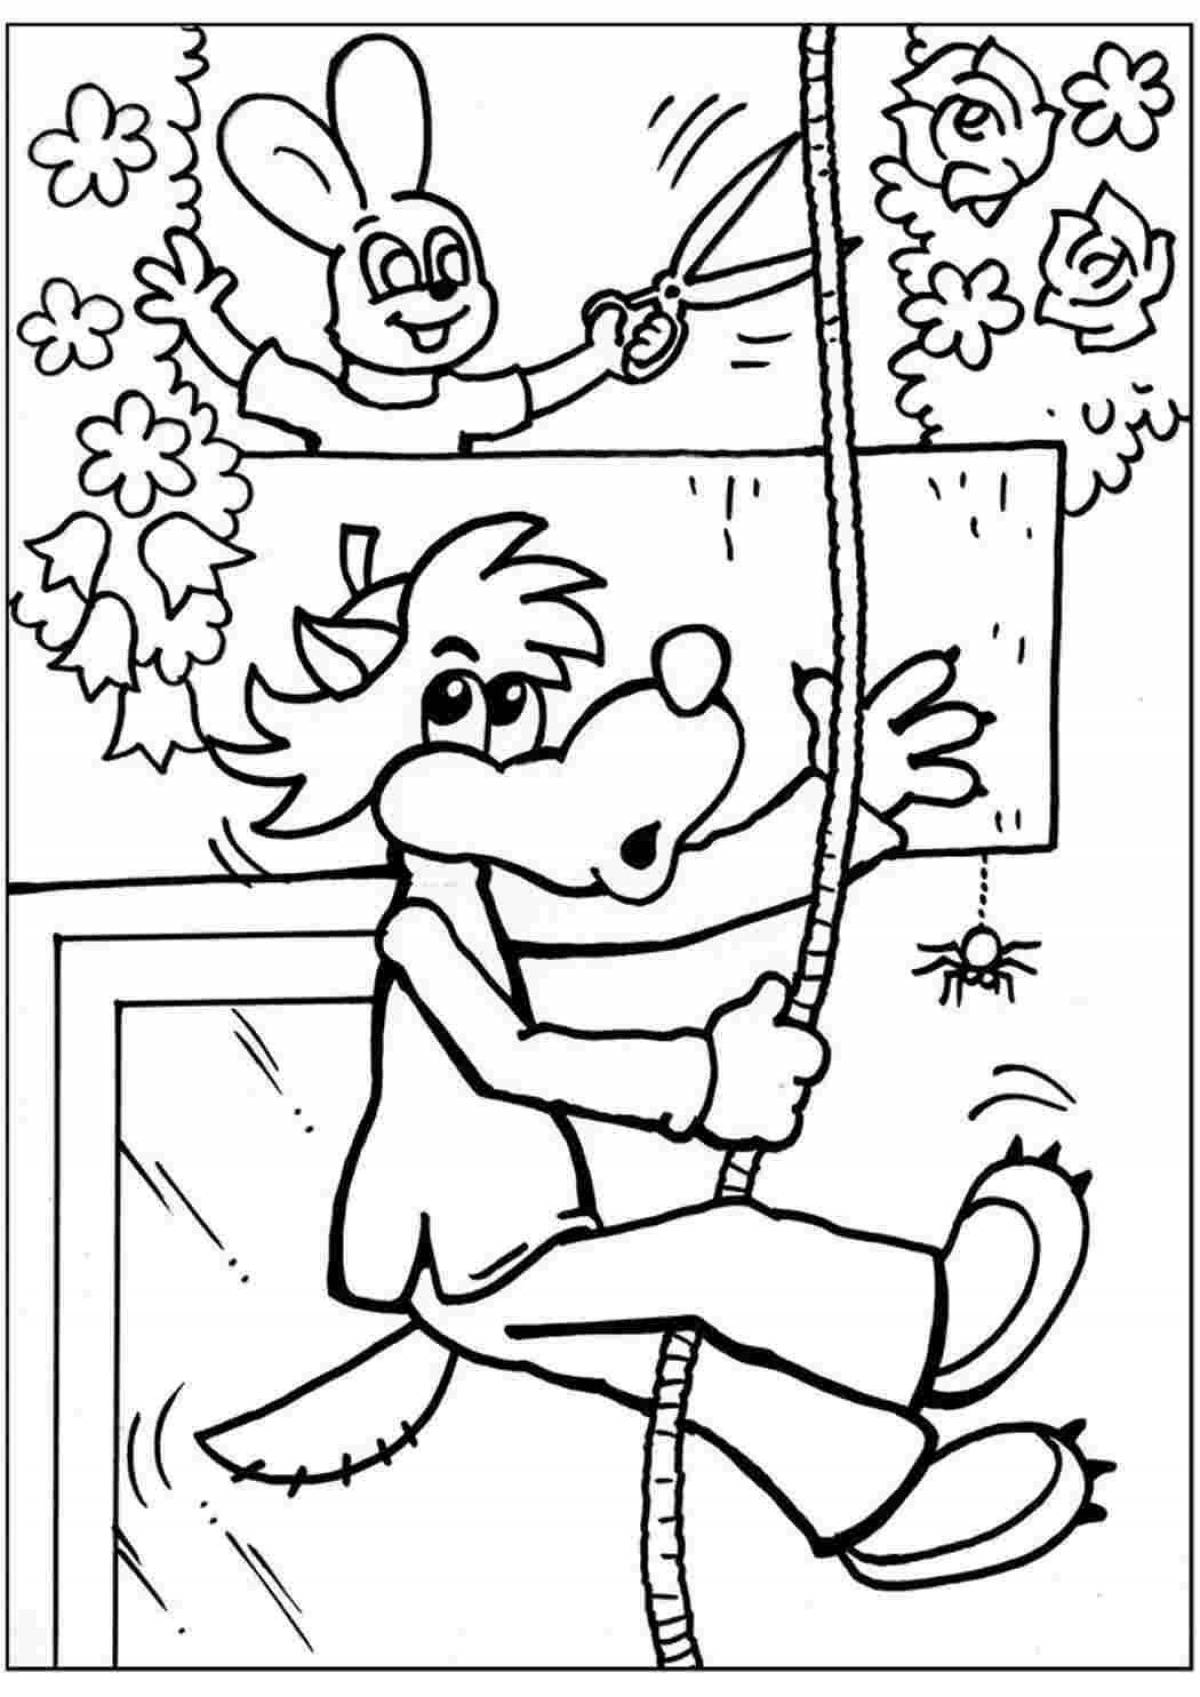 Amazing coloring page oh wait